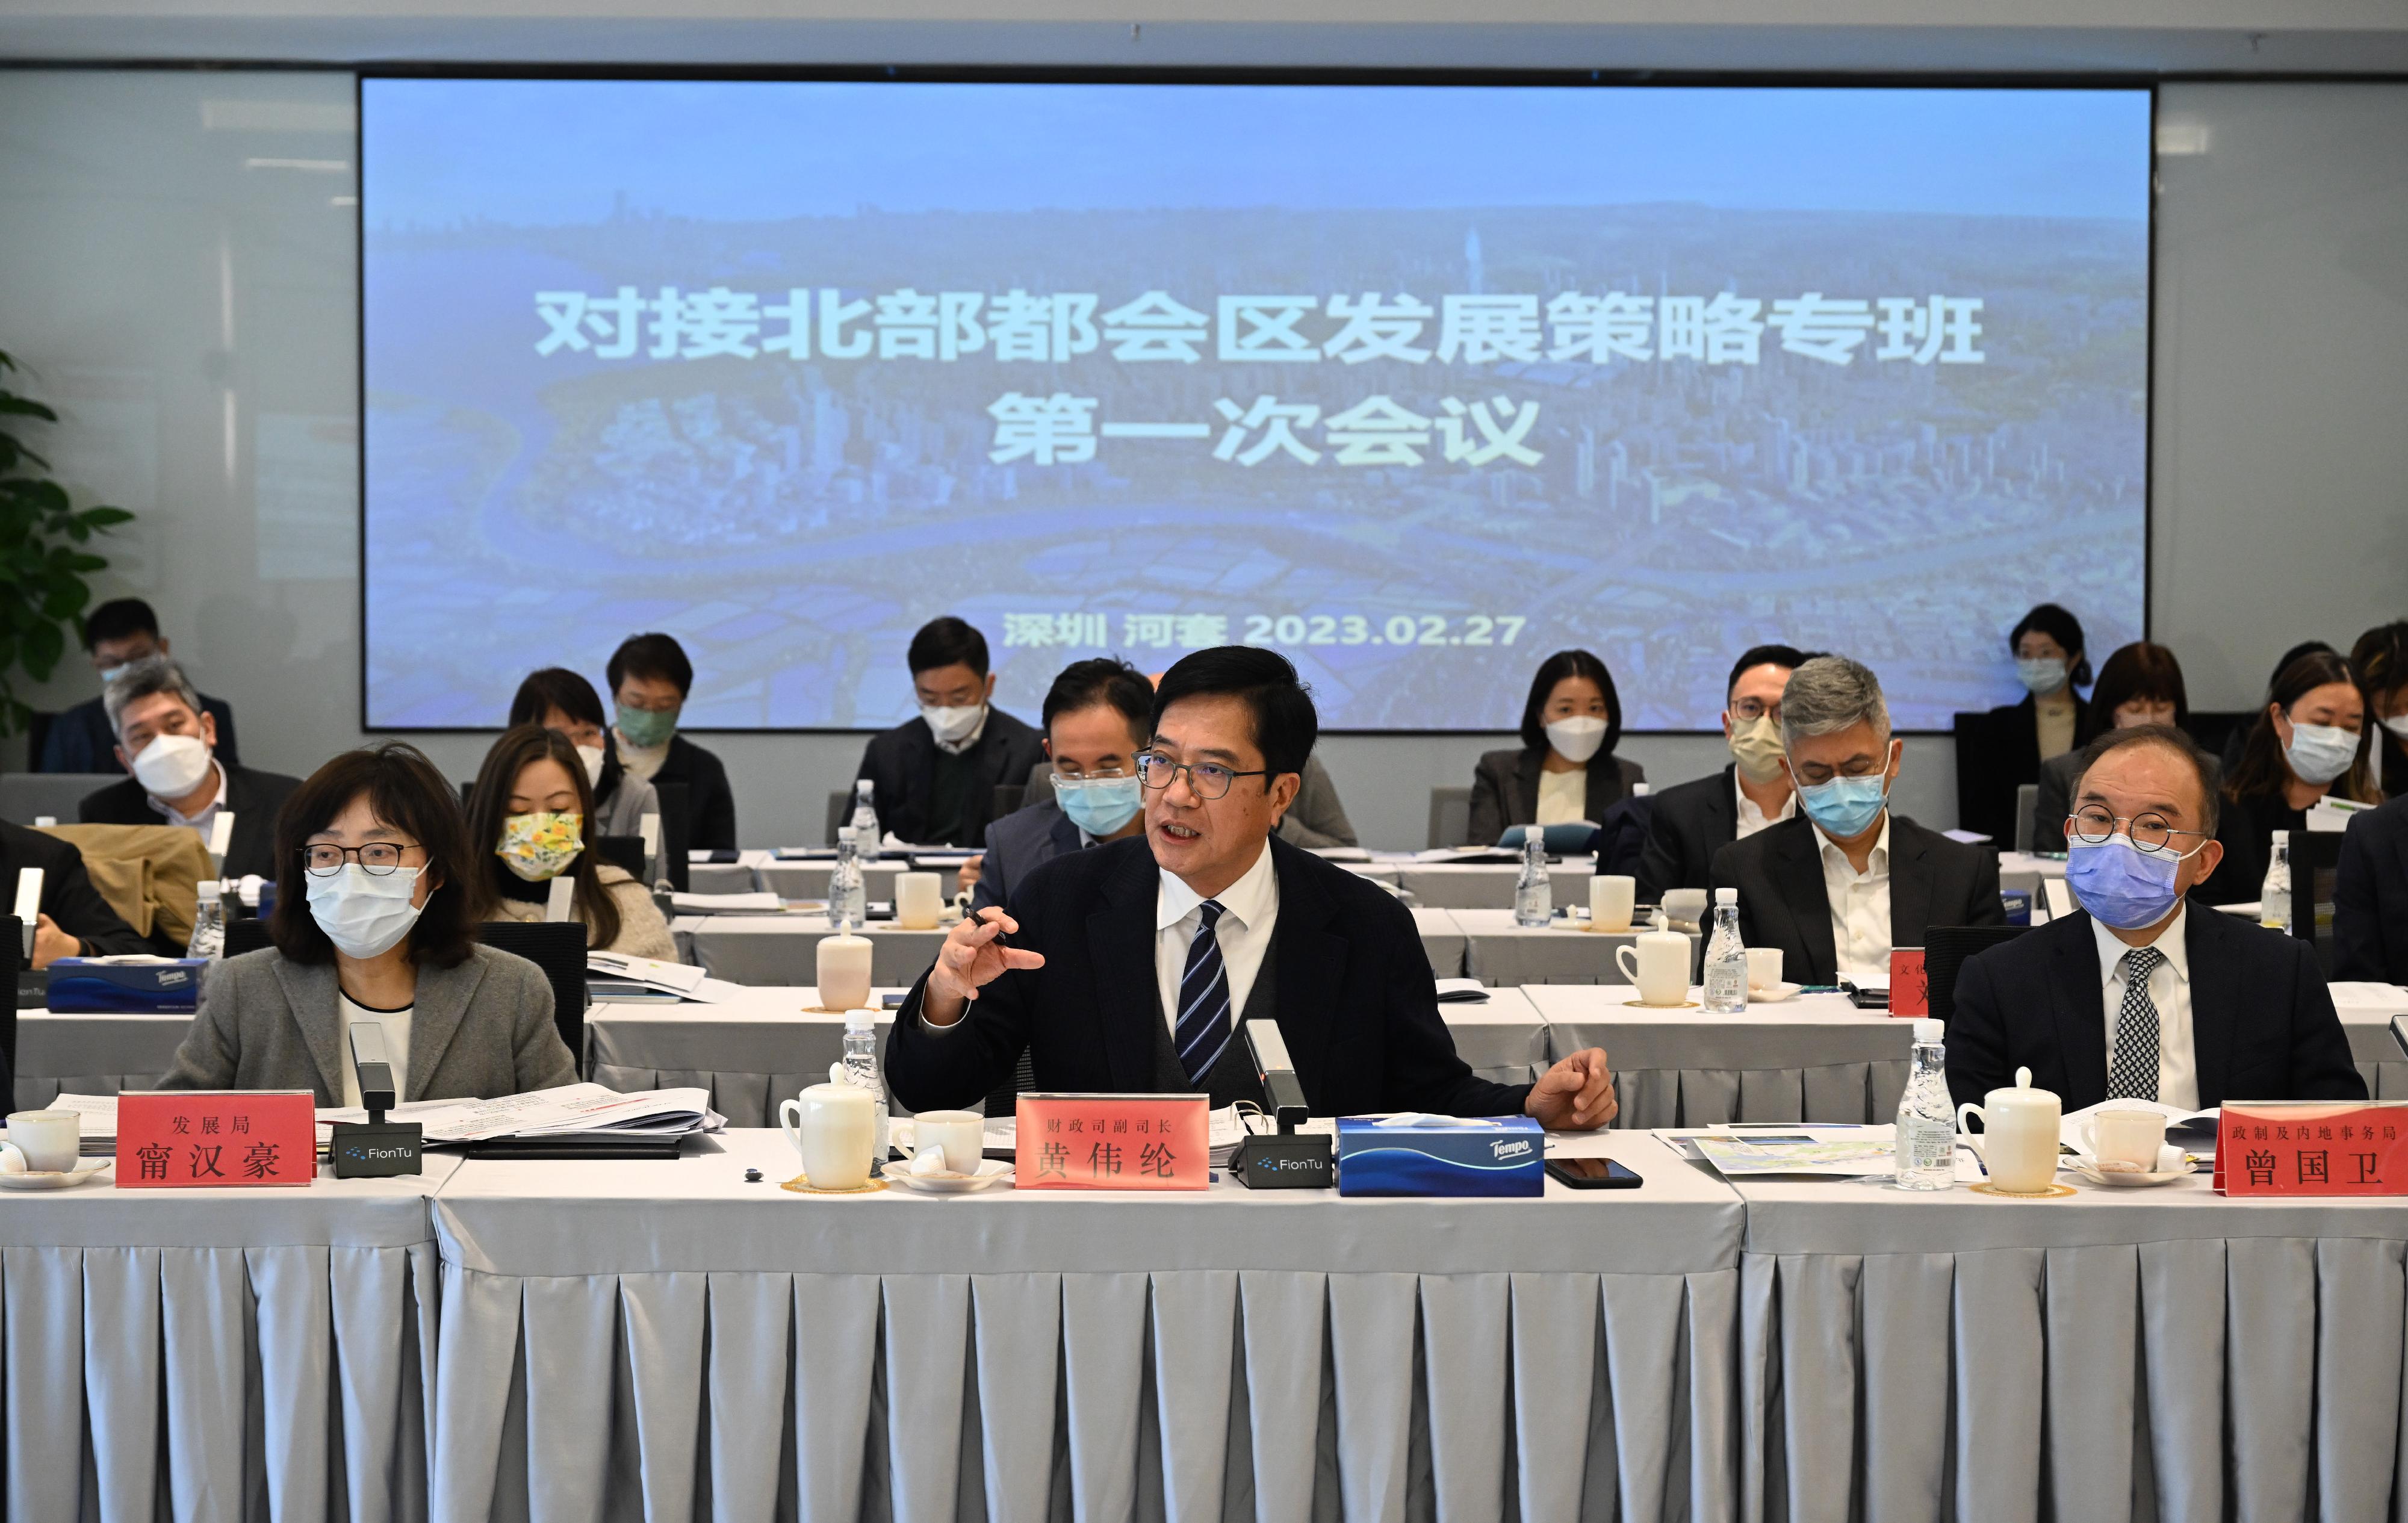 The Deputy Financial Secretary, Mr Michael Wong, and Vice Mayor of Shenzhen Municipal People's Government Mr Huang Min, leading delegations of the governments of the Hong Kong Special Administrative Region and Shenzhen respectively, held the first meeting of the Task Force for Collaboration on the Northern Metropolis Development Strategy in Shenzhen today (February 27). Photo shows Mr Wong (first row, centre) delivering opening remarks at the meeting. Looking on are the Secretary for Constitutional and Mainland Affairs, Mr Erick Tsang Kwok-wai (first row, right), and the Secretary for Development, Ms Bernadette Linn (first row, left).